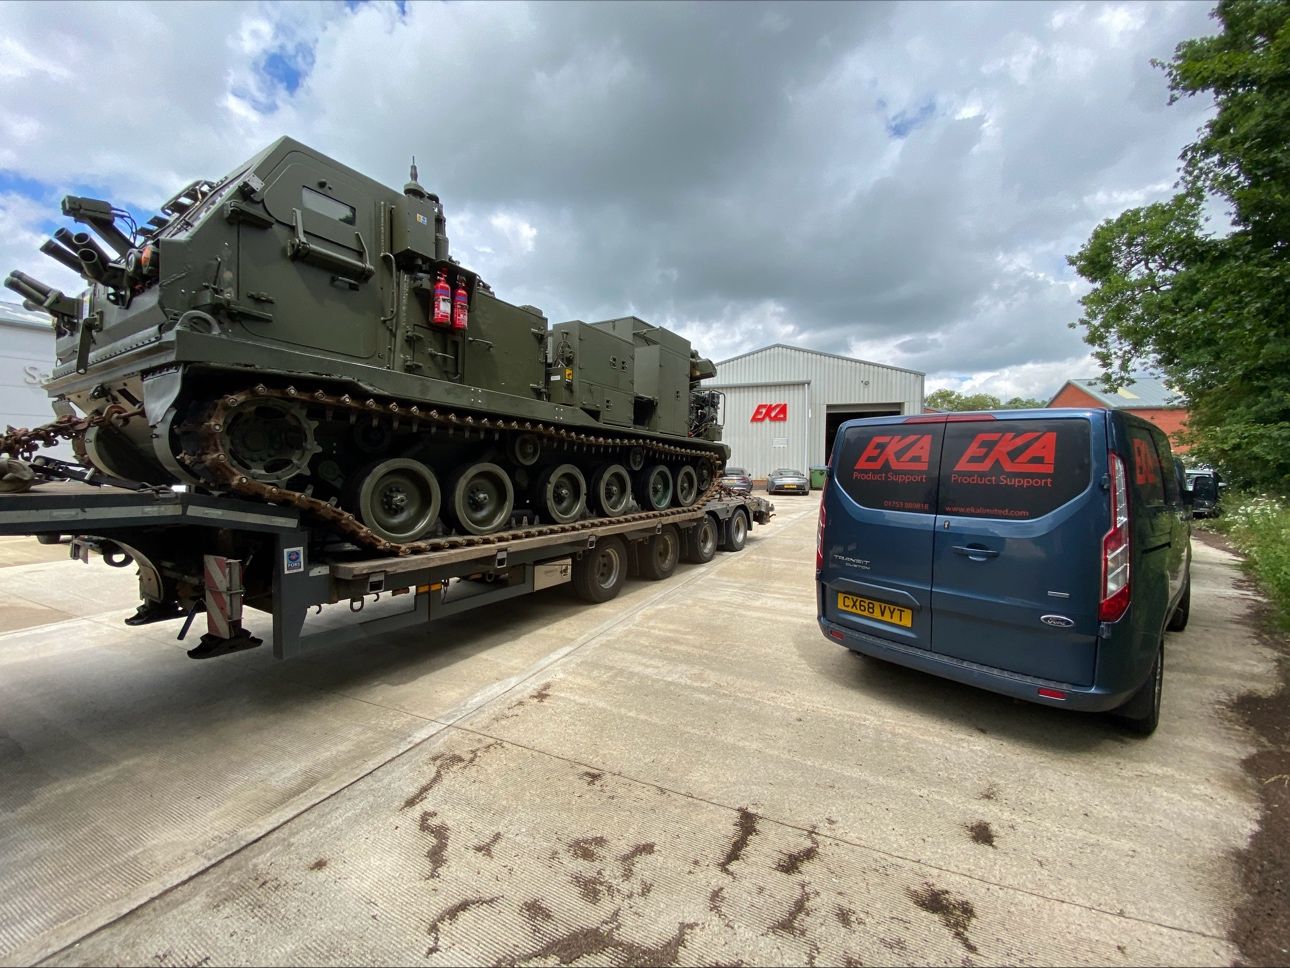 EKA Ltd Awarded NSPA Contract to Deliver Repair and Recovery Vehicles for British Army